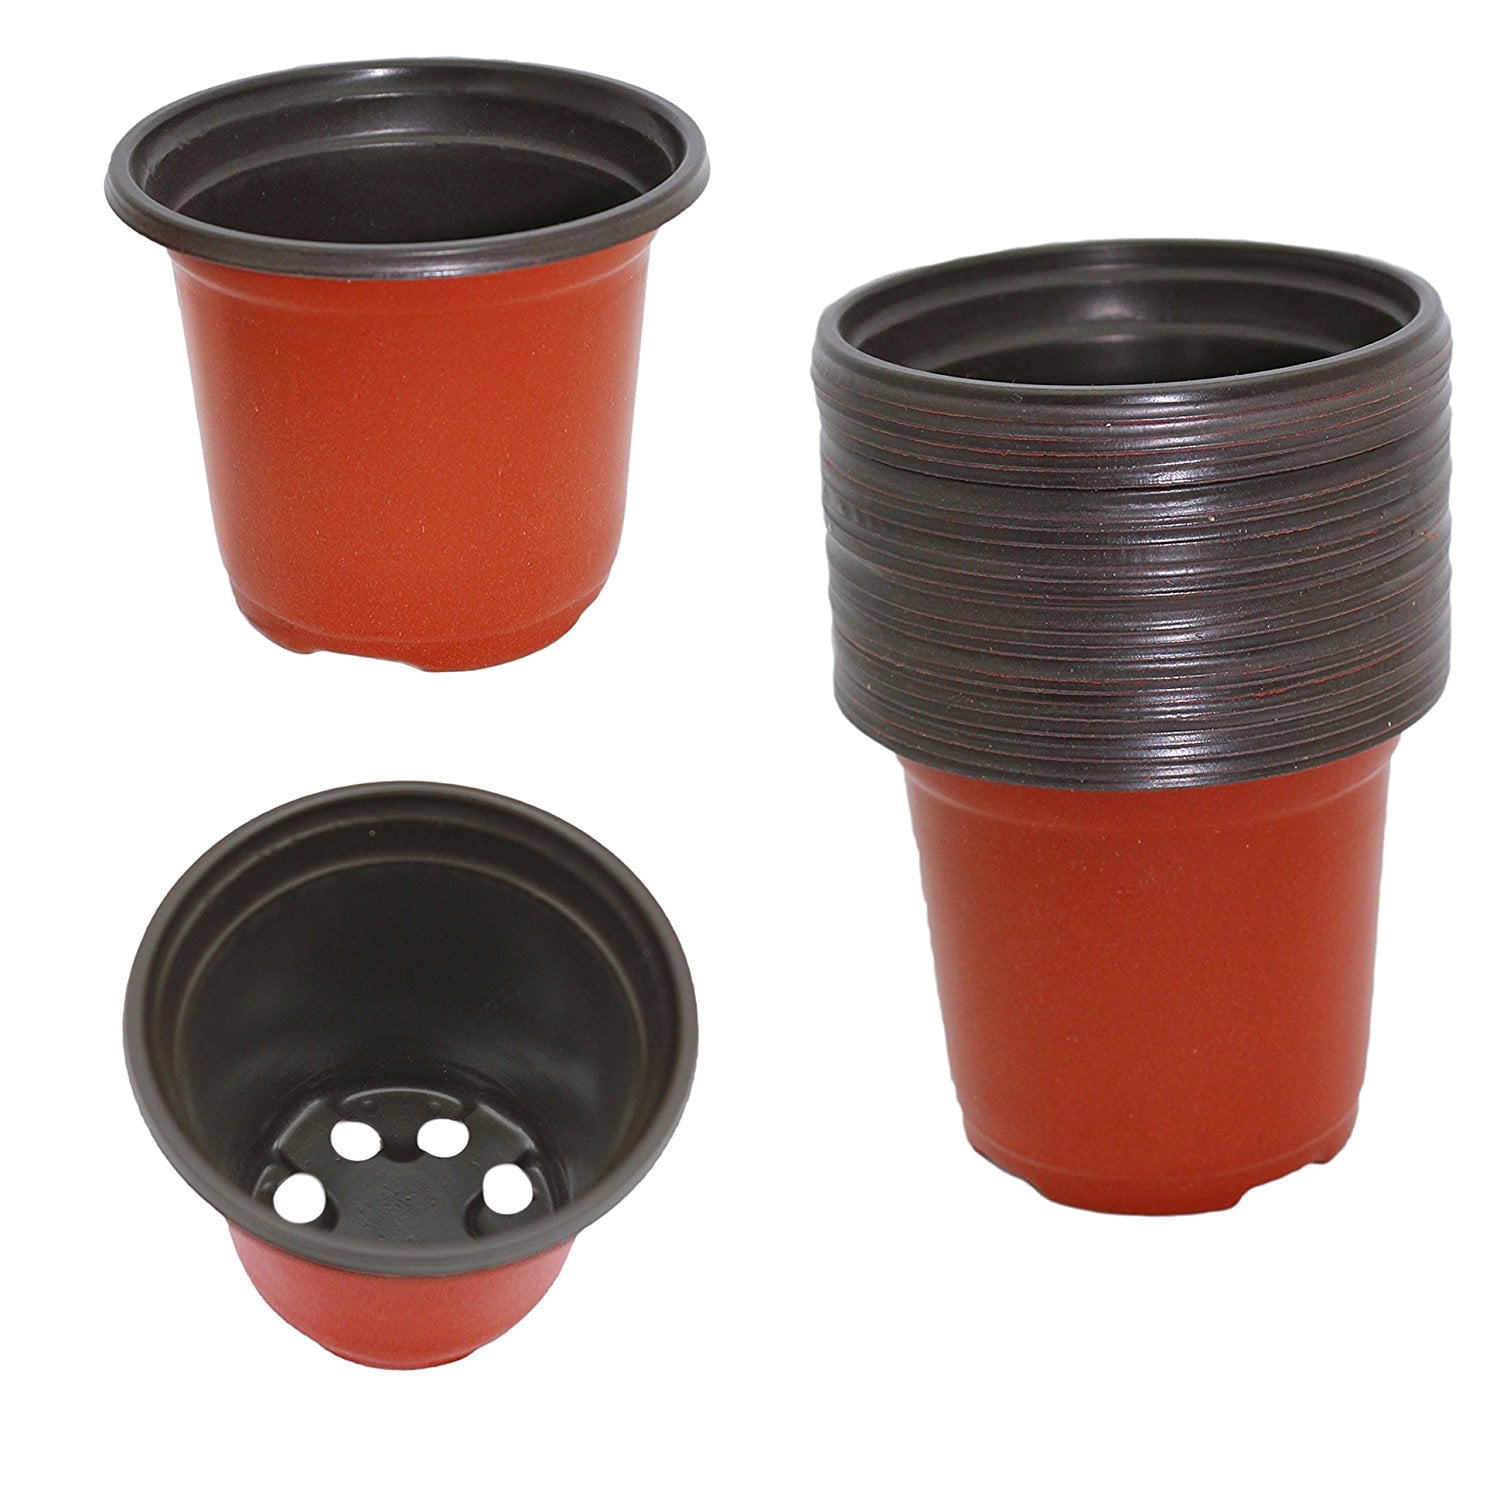 Details about   Square Nursery Seedling Pots Deep Seed Planting Plant Starter Starting Pot 100Ct 